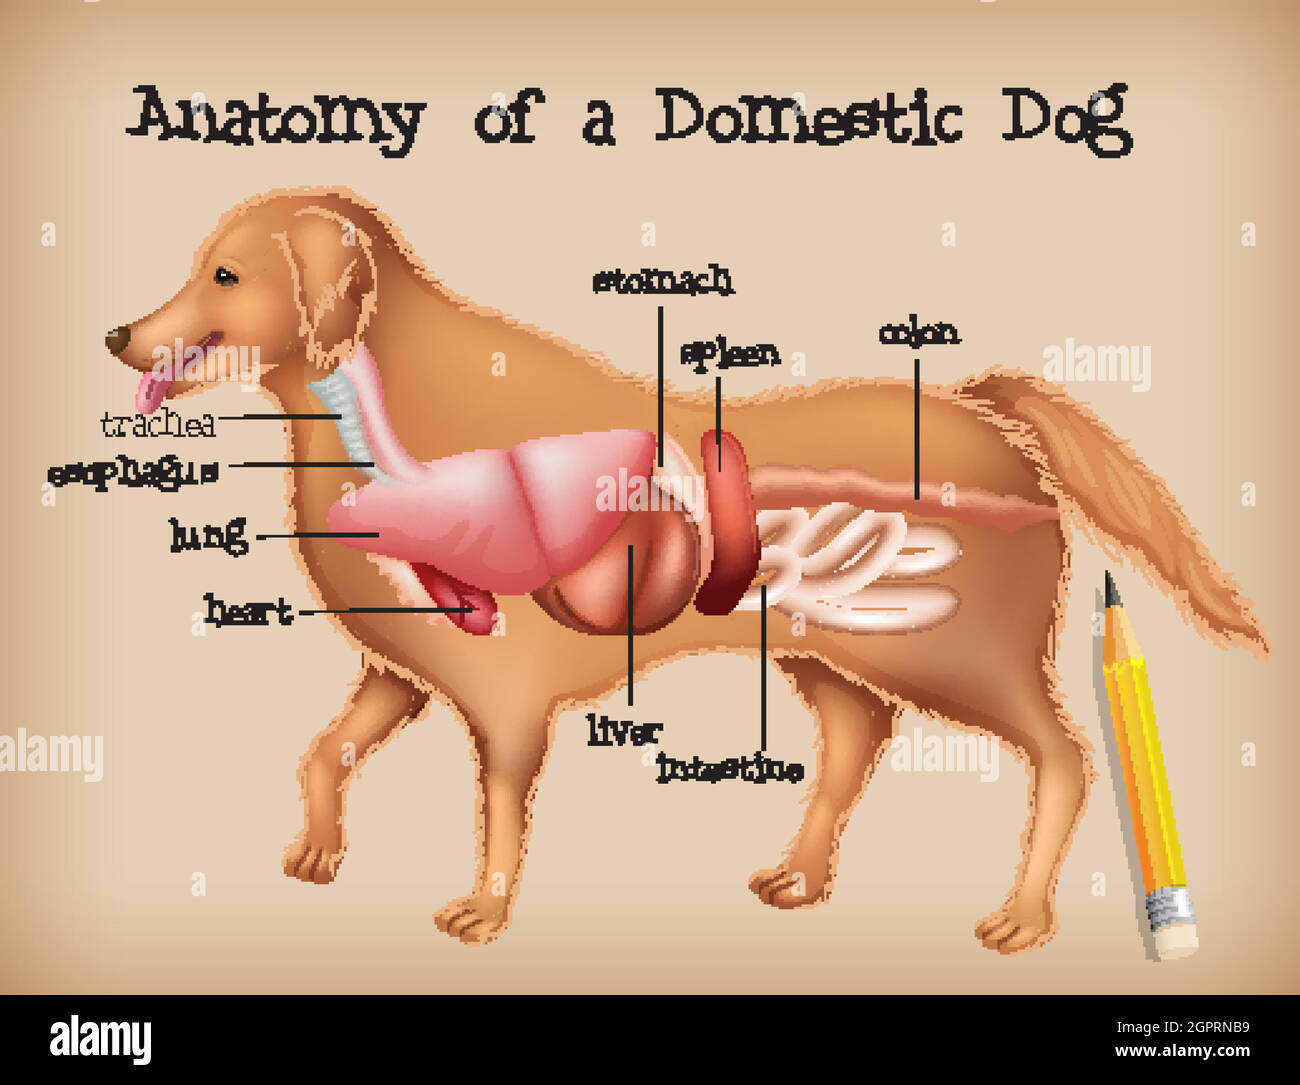 Anatomy of a domestic dog Stock Vector